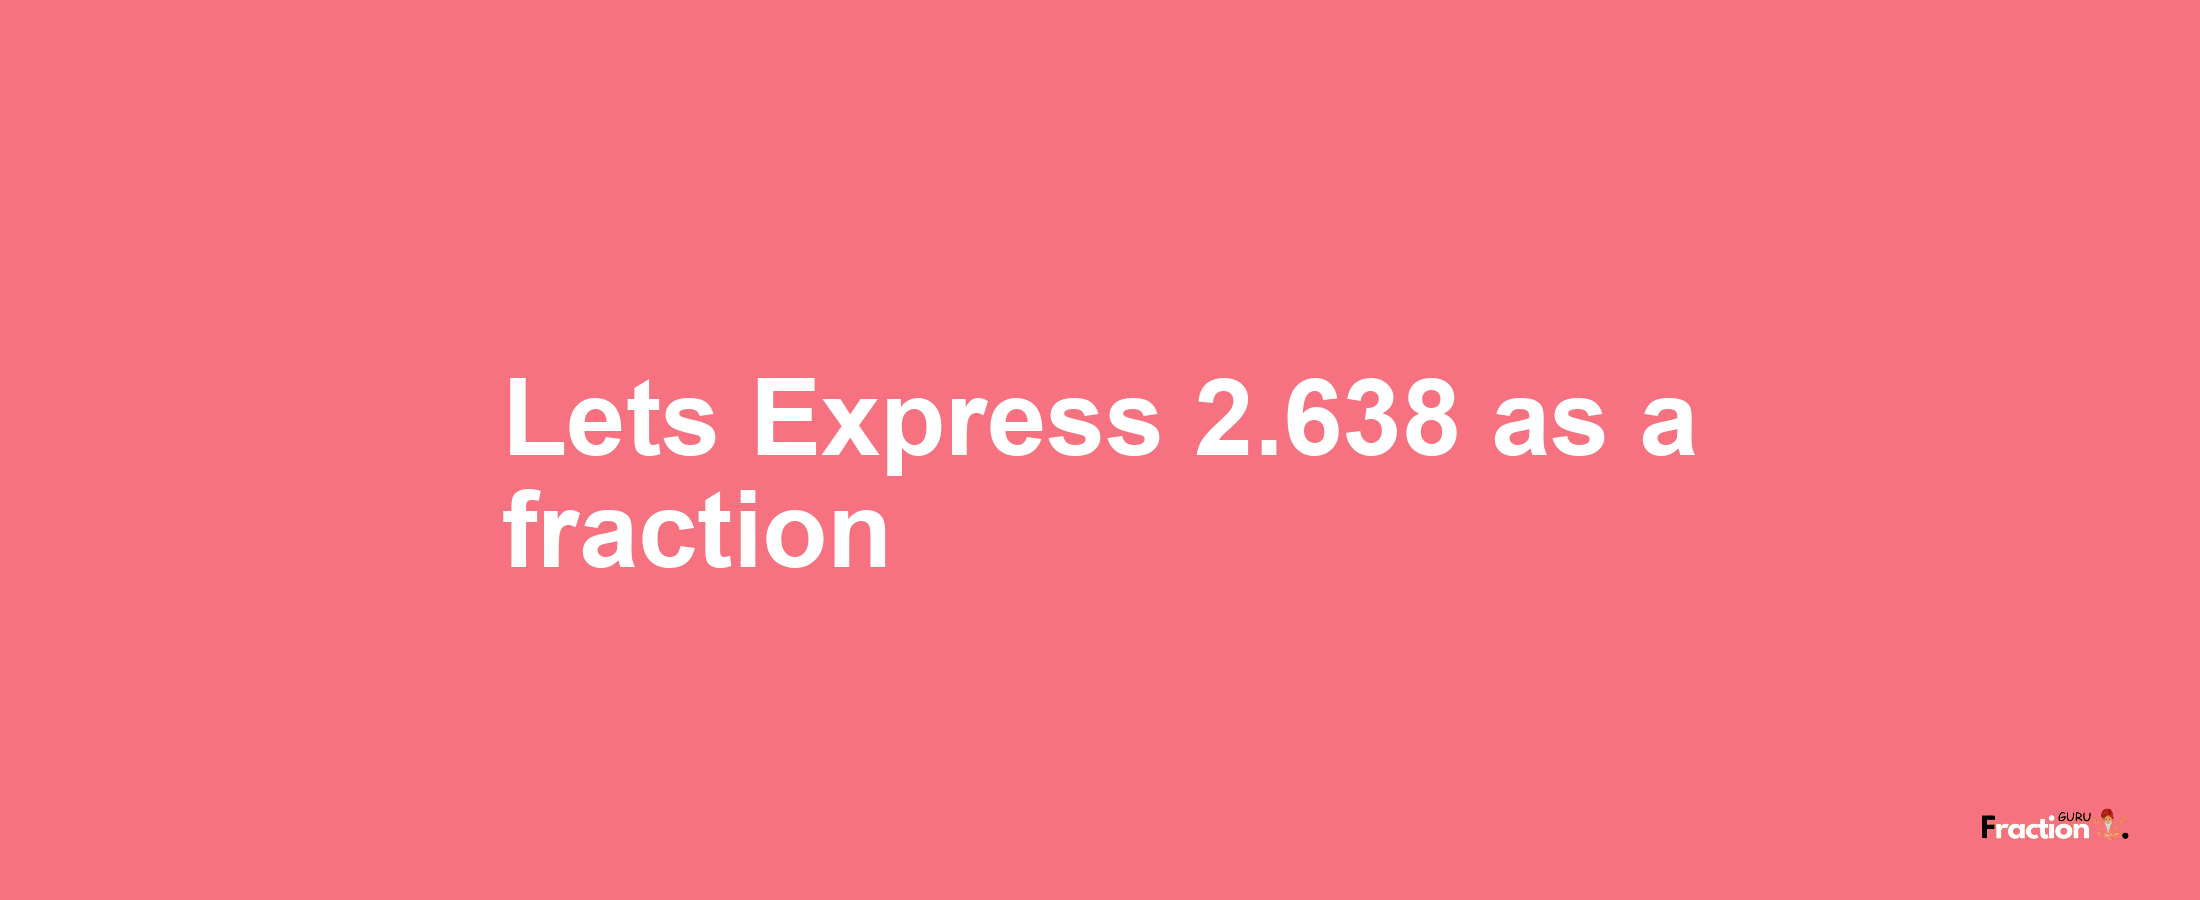 Lets Express 2.638 as afraction